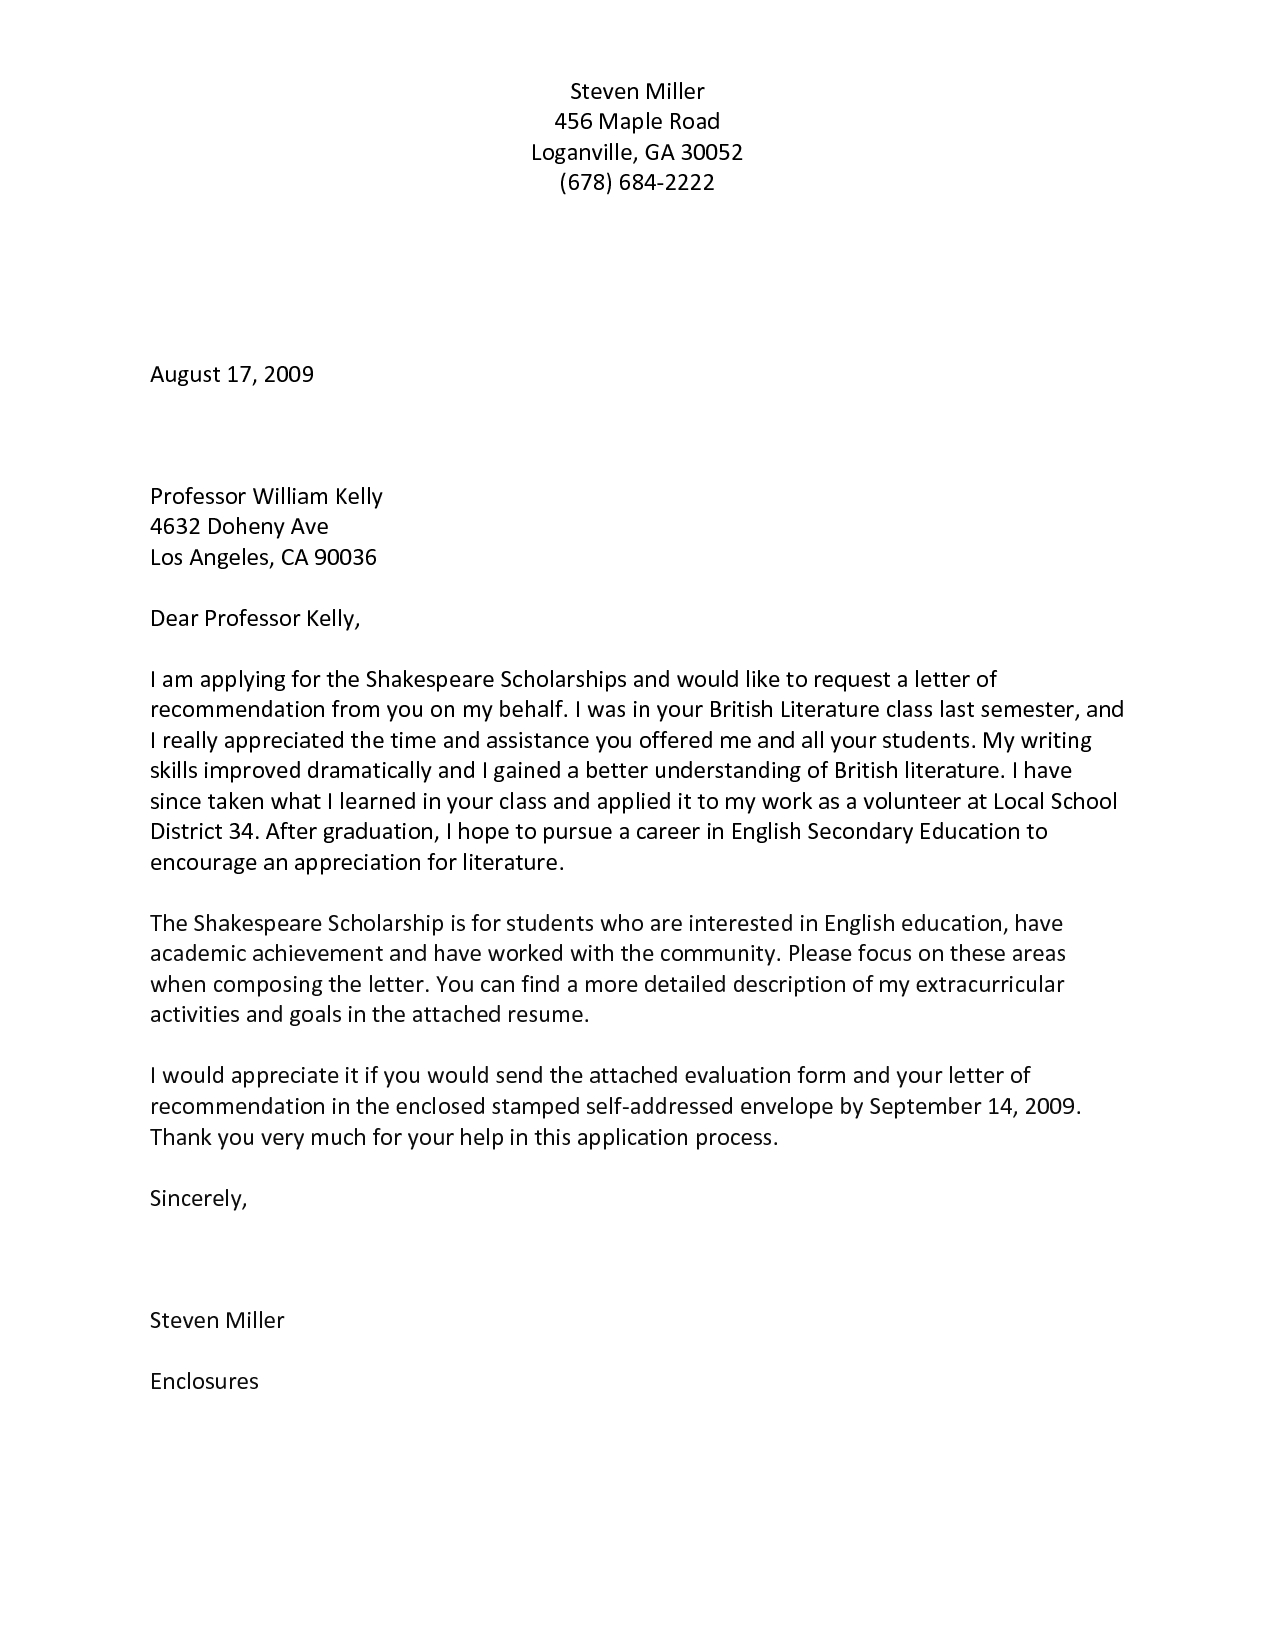 Letter Of Recommendation Request Template Template Business within proportions 1275 X 1650